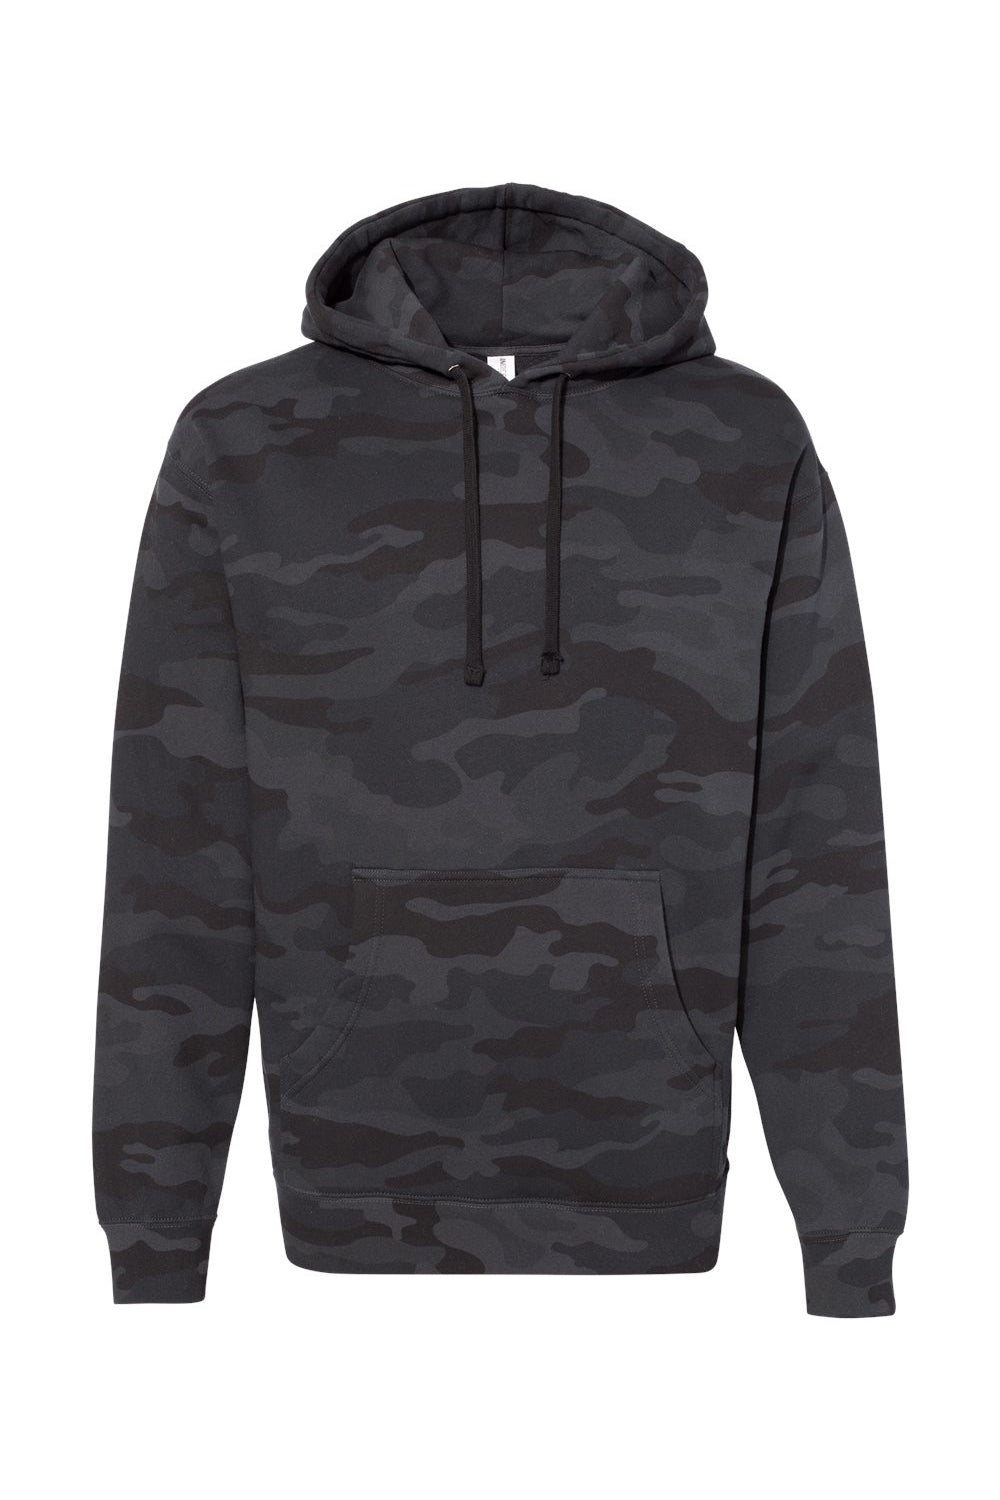 Independent Trading Co. IND4000 Mens Hooded Sweatshirt Hoodie Black Camo Flat Front